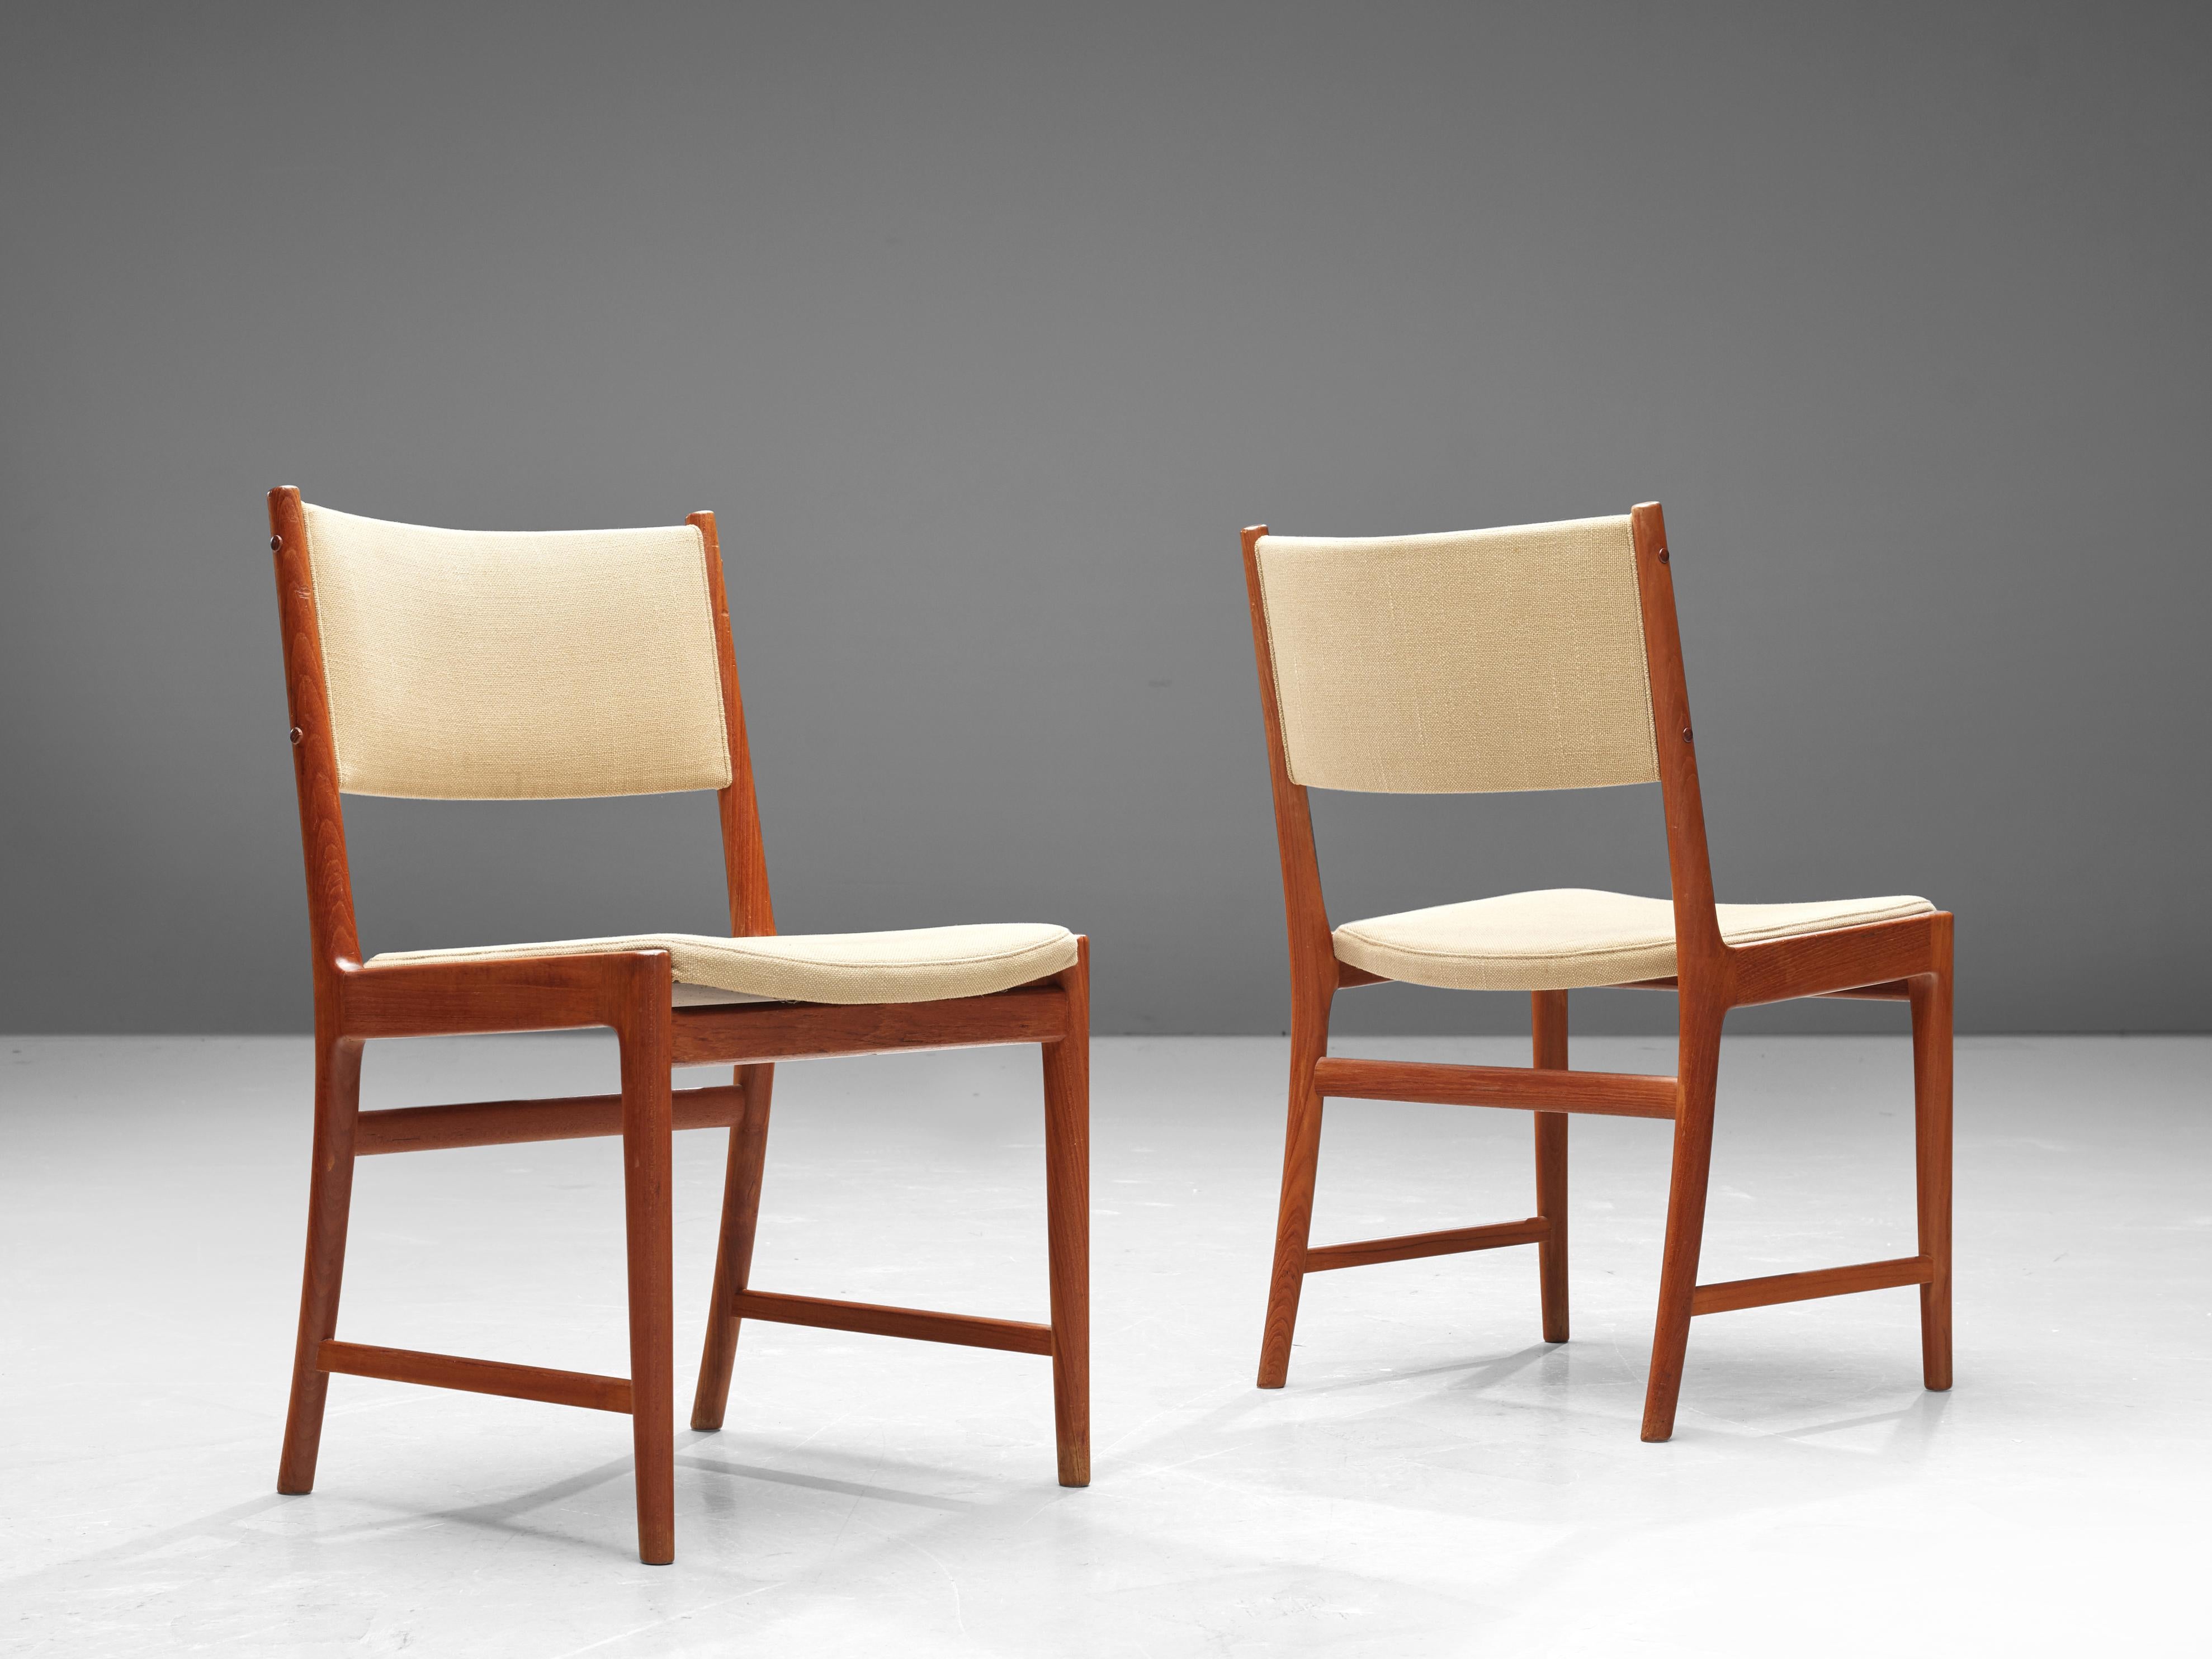 Kai Lyngfeldt Larsen, pair of dining chairs, teak, fabric, Denmark, 1950s

These elegant teak dining chairs are both stately and modest. The teak frame beautifully complements with the beige upholstery. The back of this piece is slightly bent